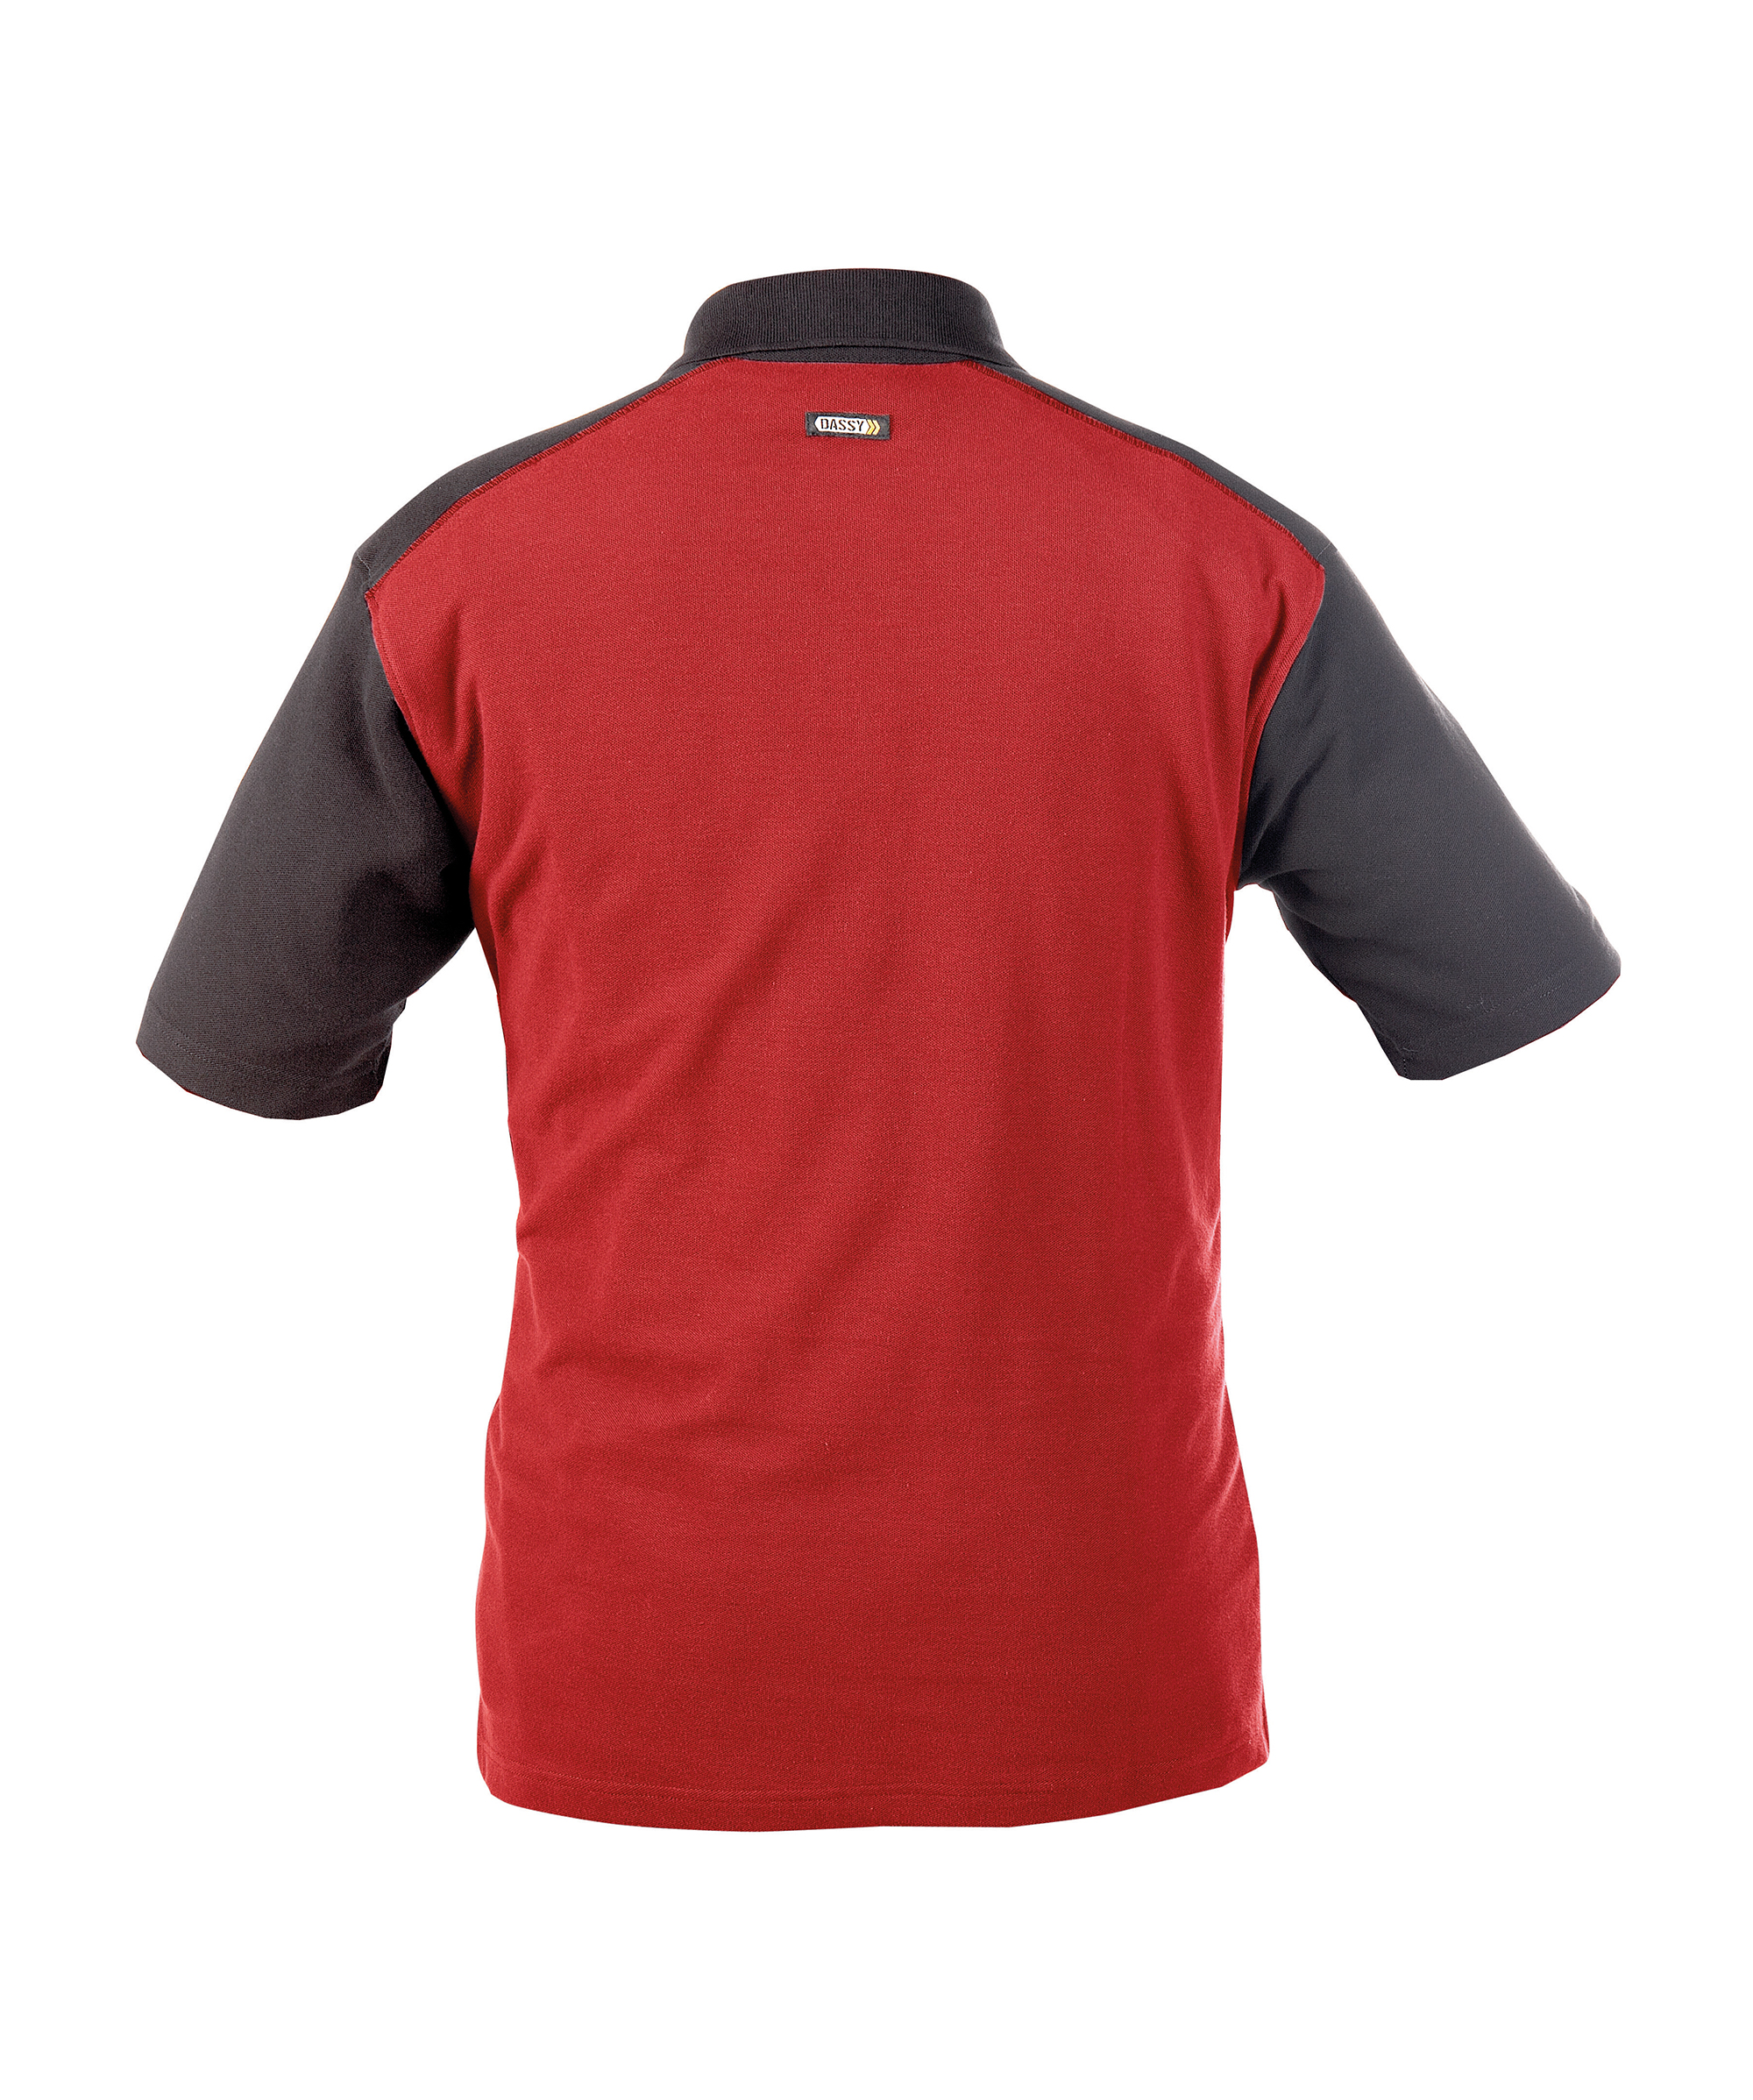 cesar_two-tone-polo-shirt_red-cement-grey_back.jpg